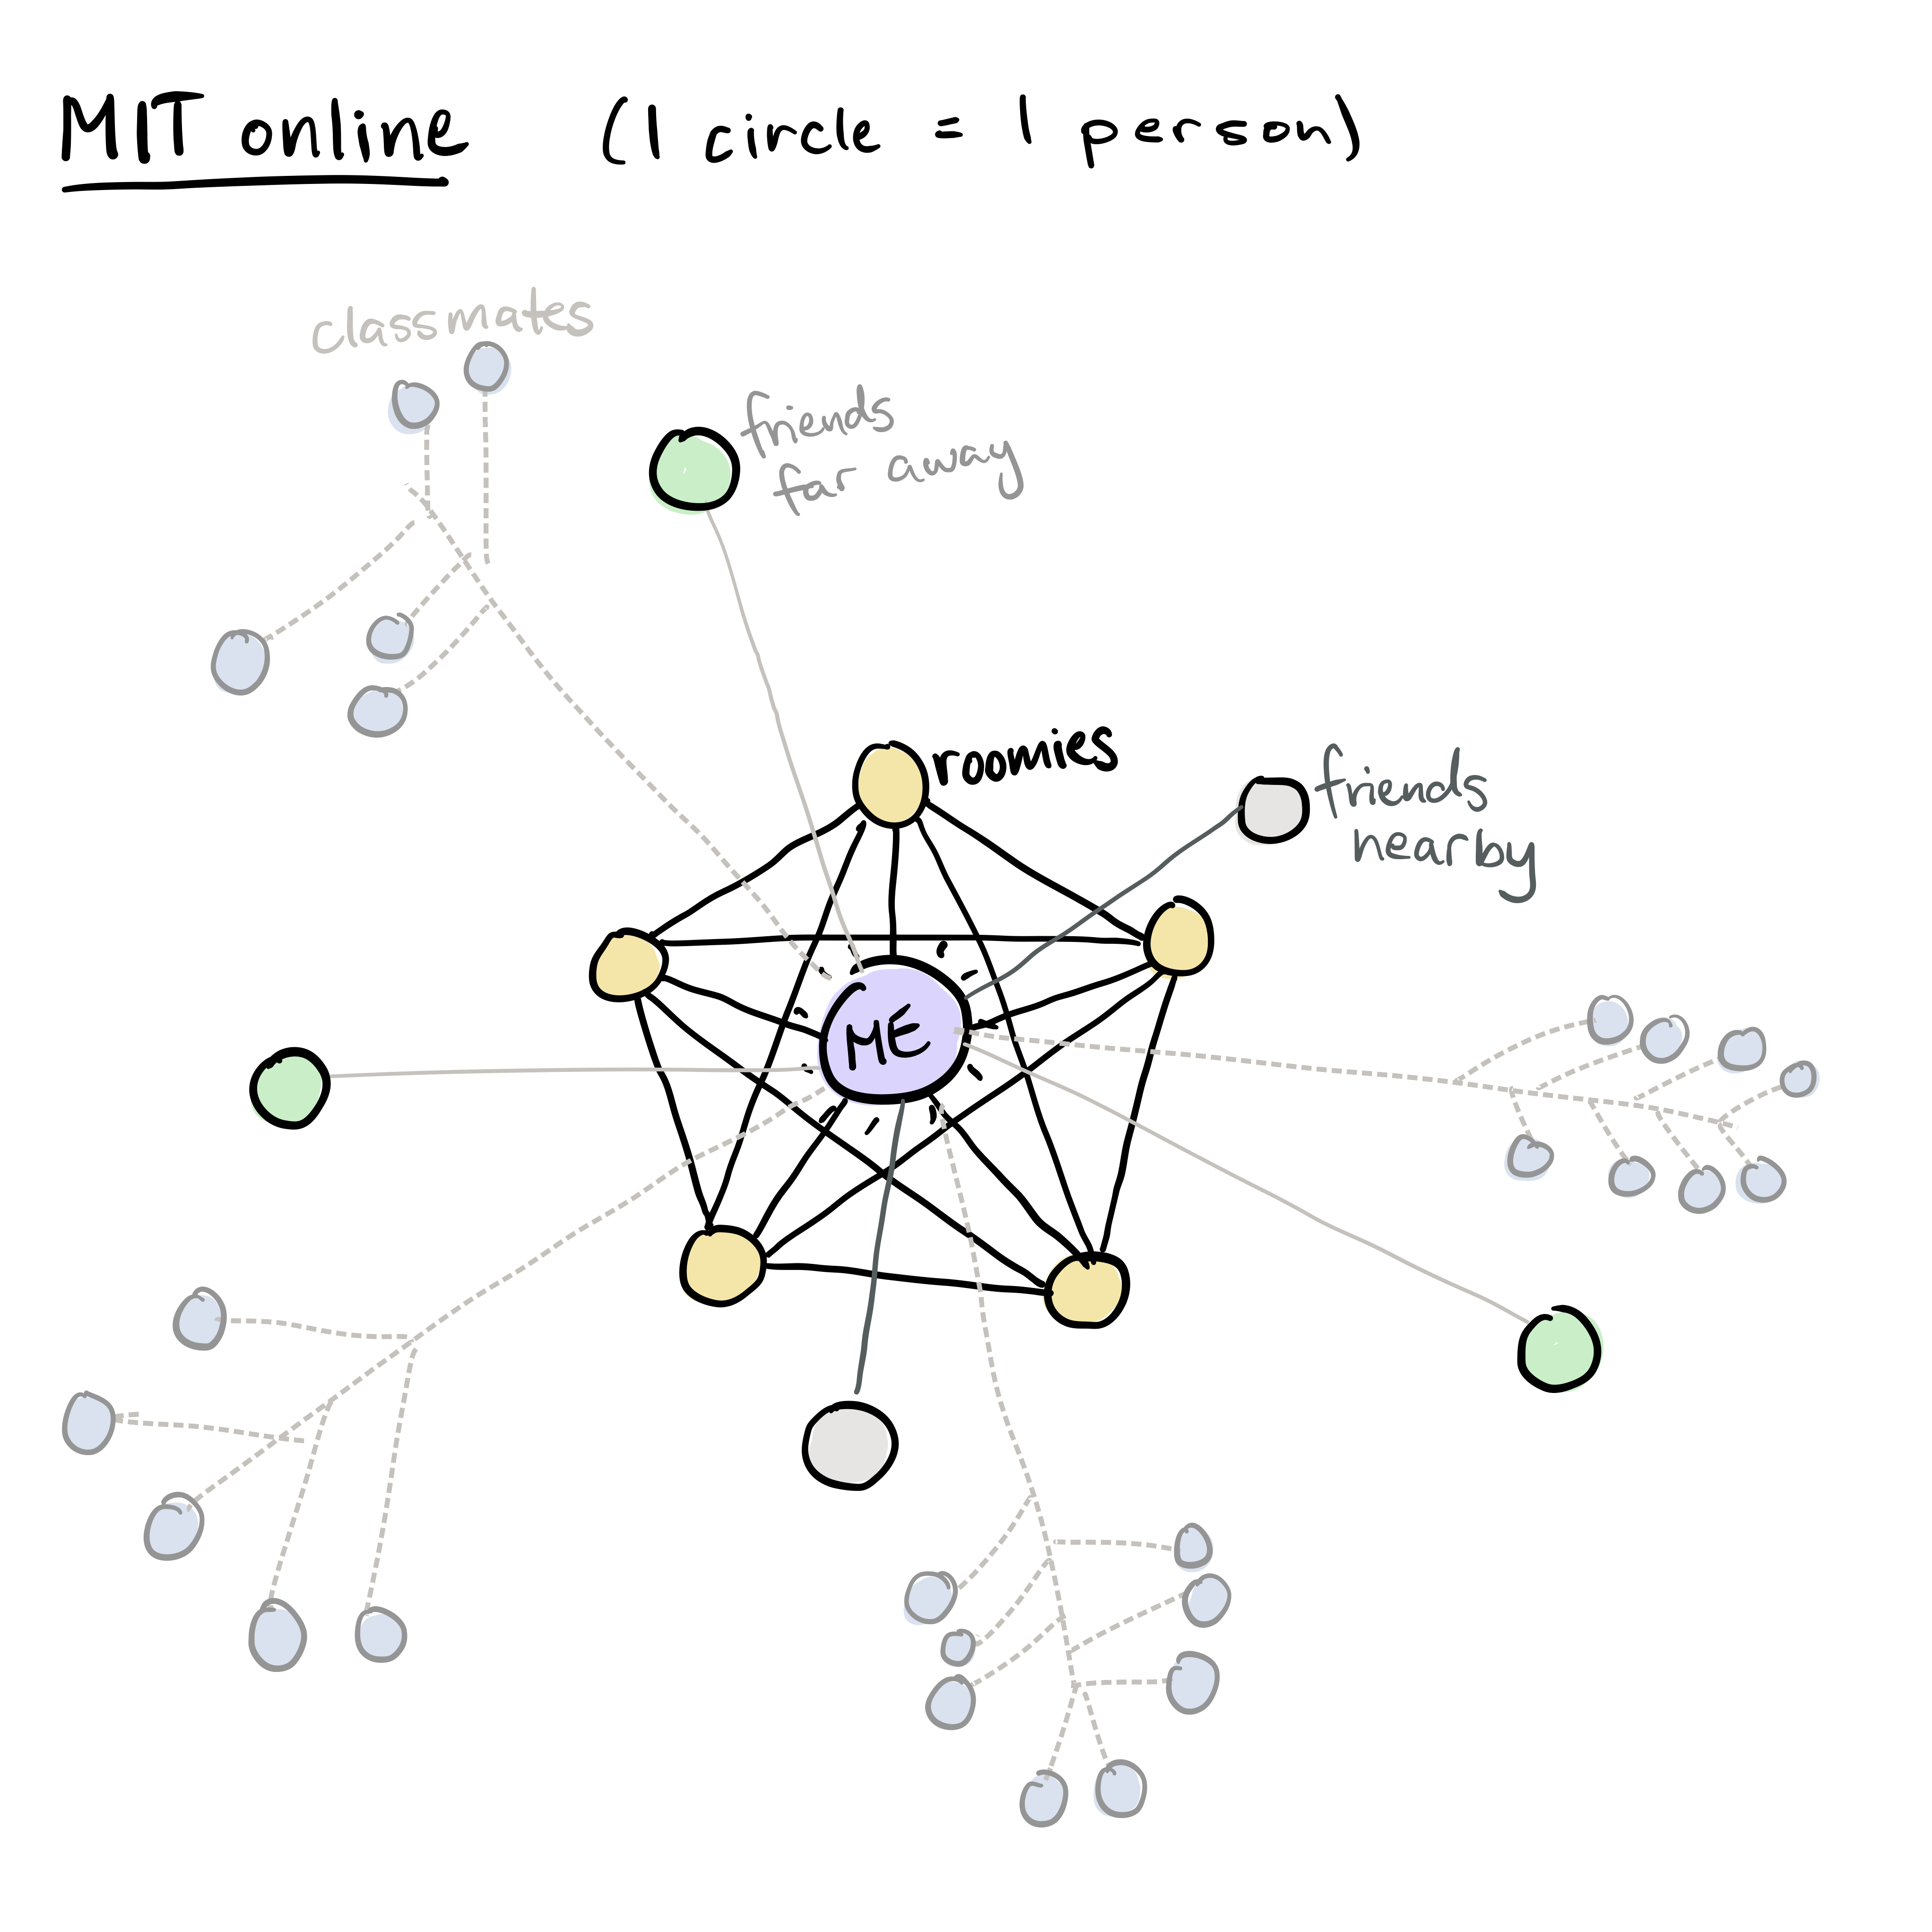 A graph titled "MIT online". The legend says one node equals one person. The graph has me at the center and shows my connections to three groups: my five roommates (close to me), five friends (a little further away), and lots of classmates (very far away).